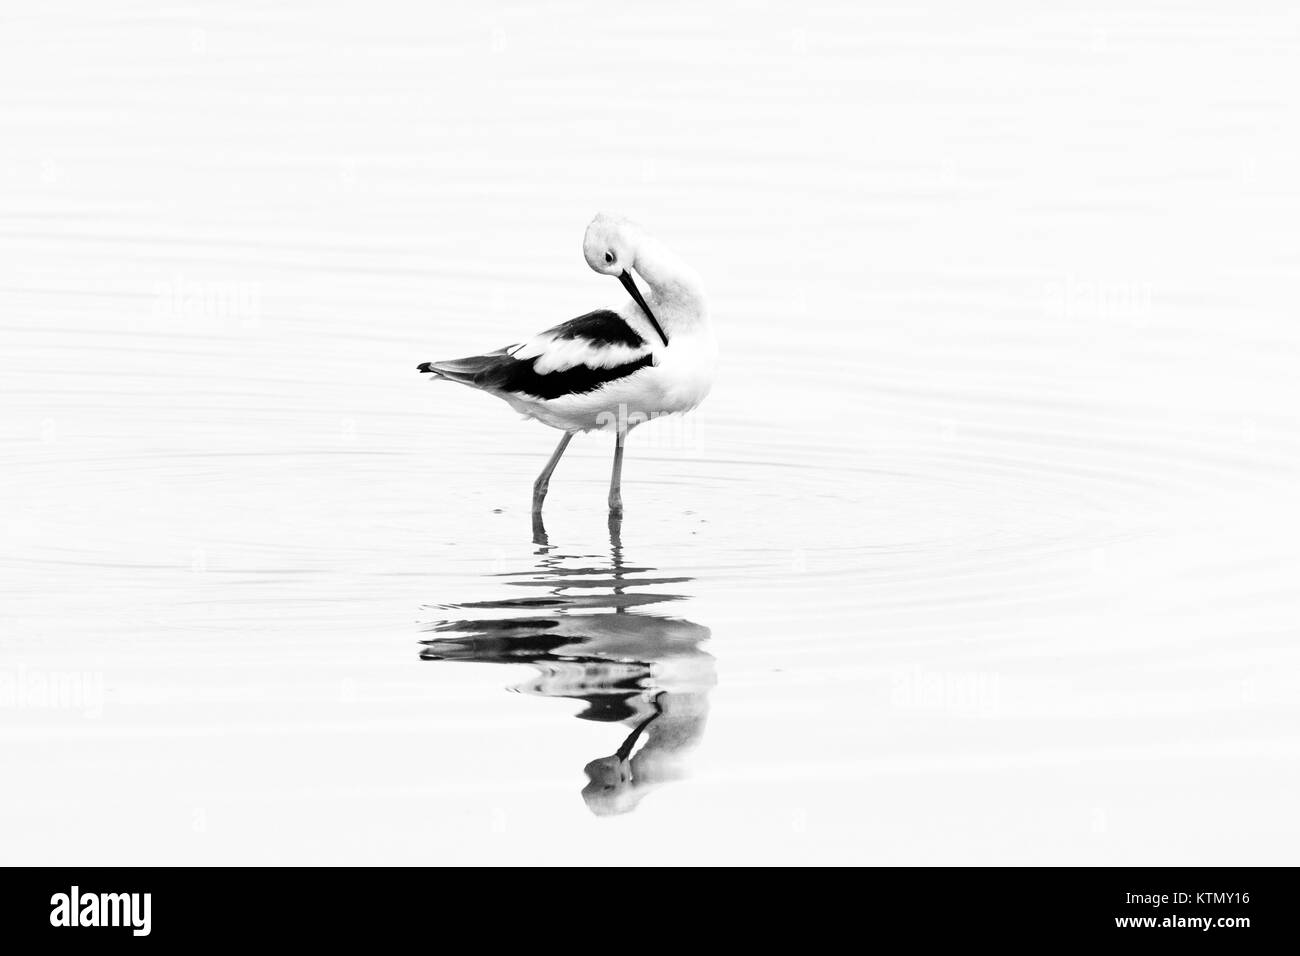 American Avocet, in winter plumage, wading in the waters of the San Pablo Bay National Wildlife Refuge in northern California. Stock Photo